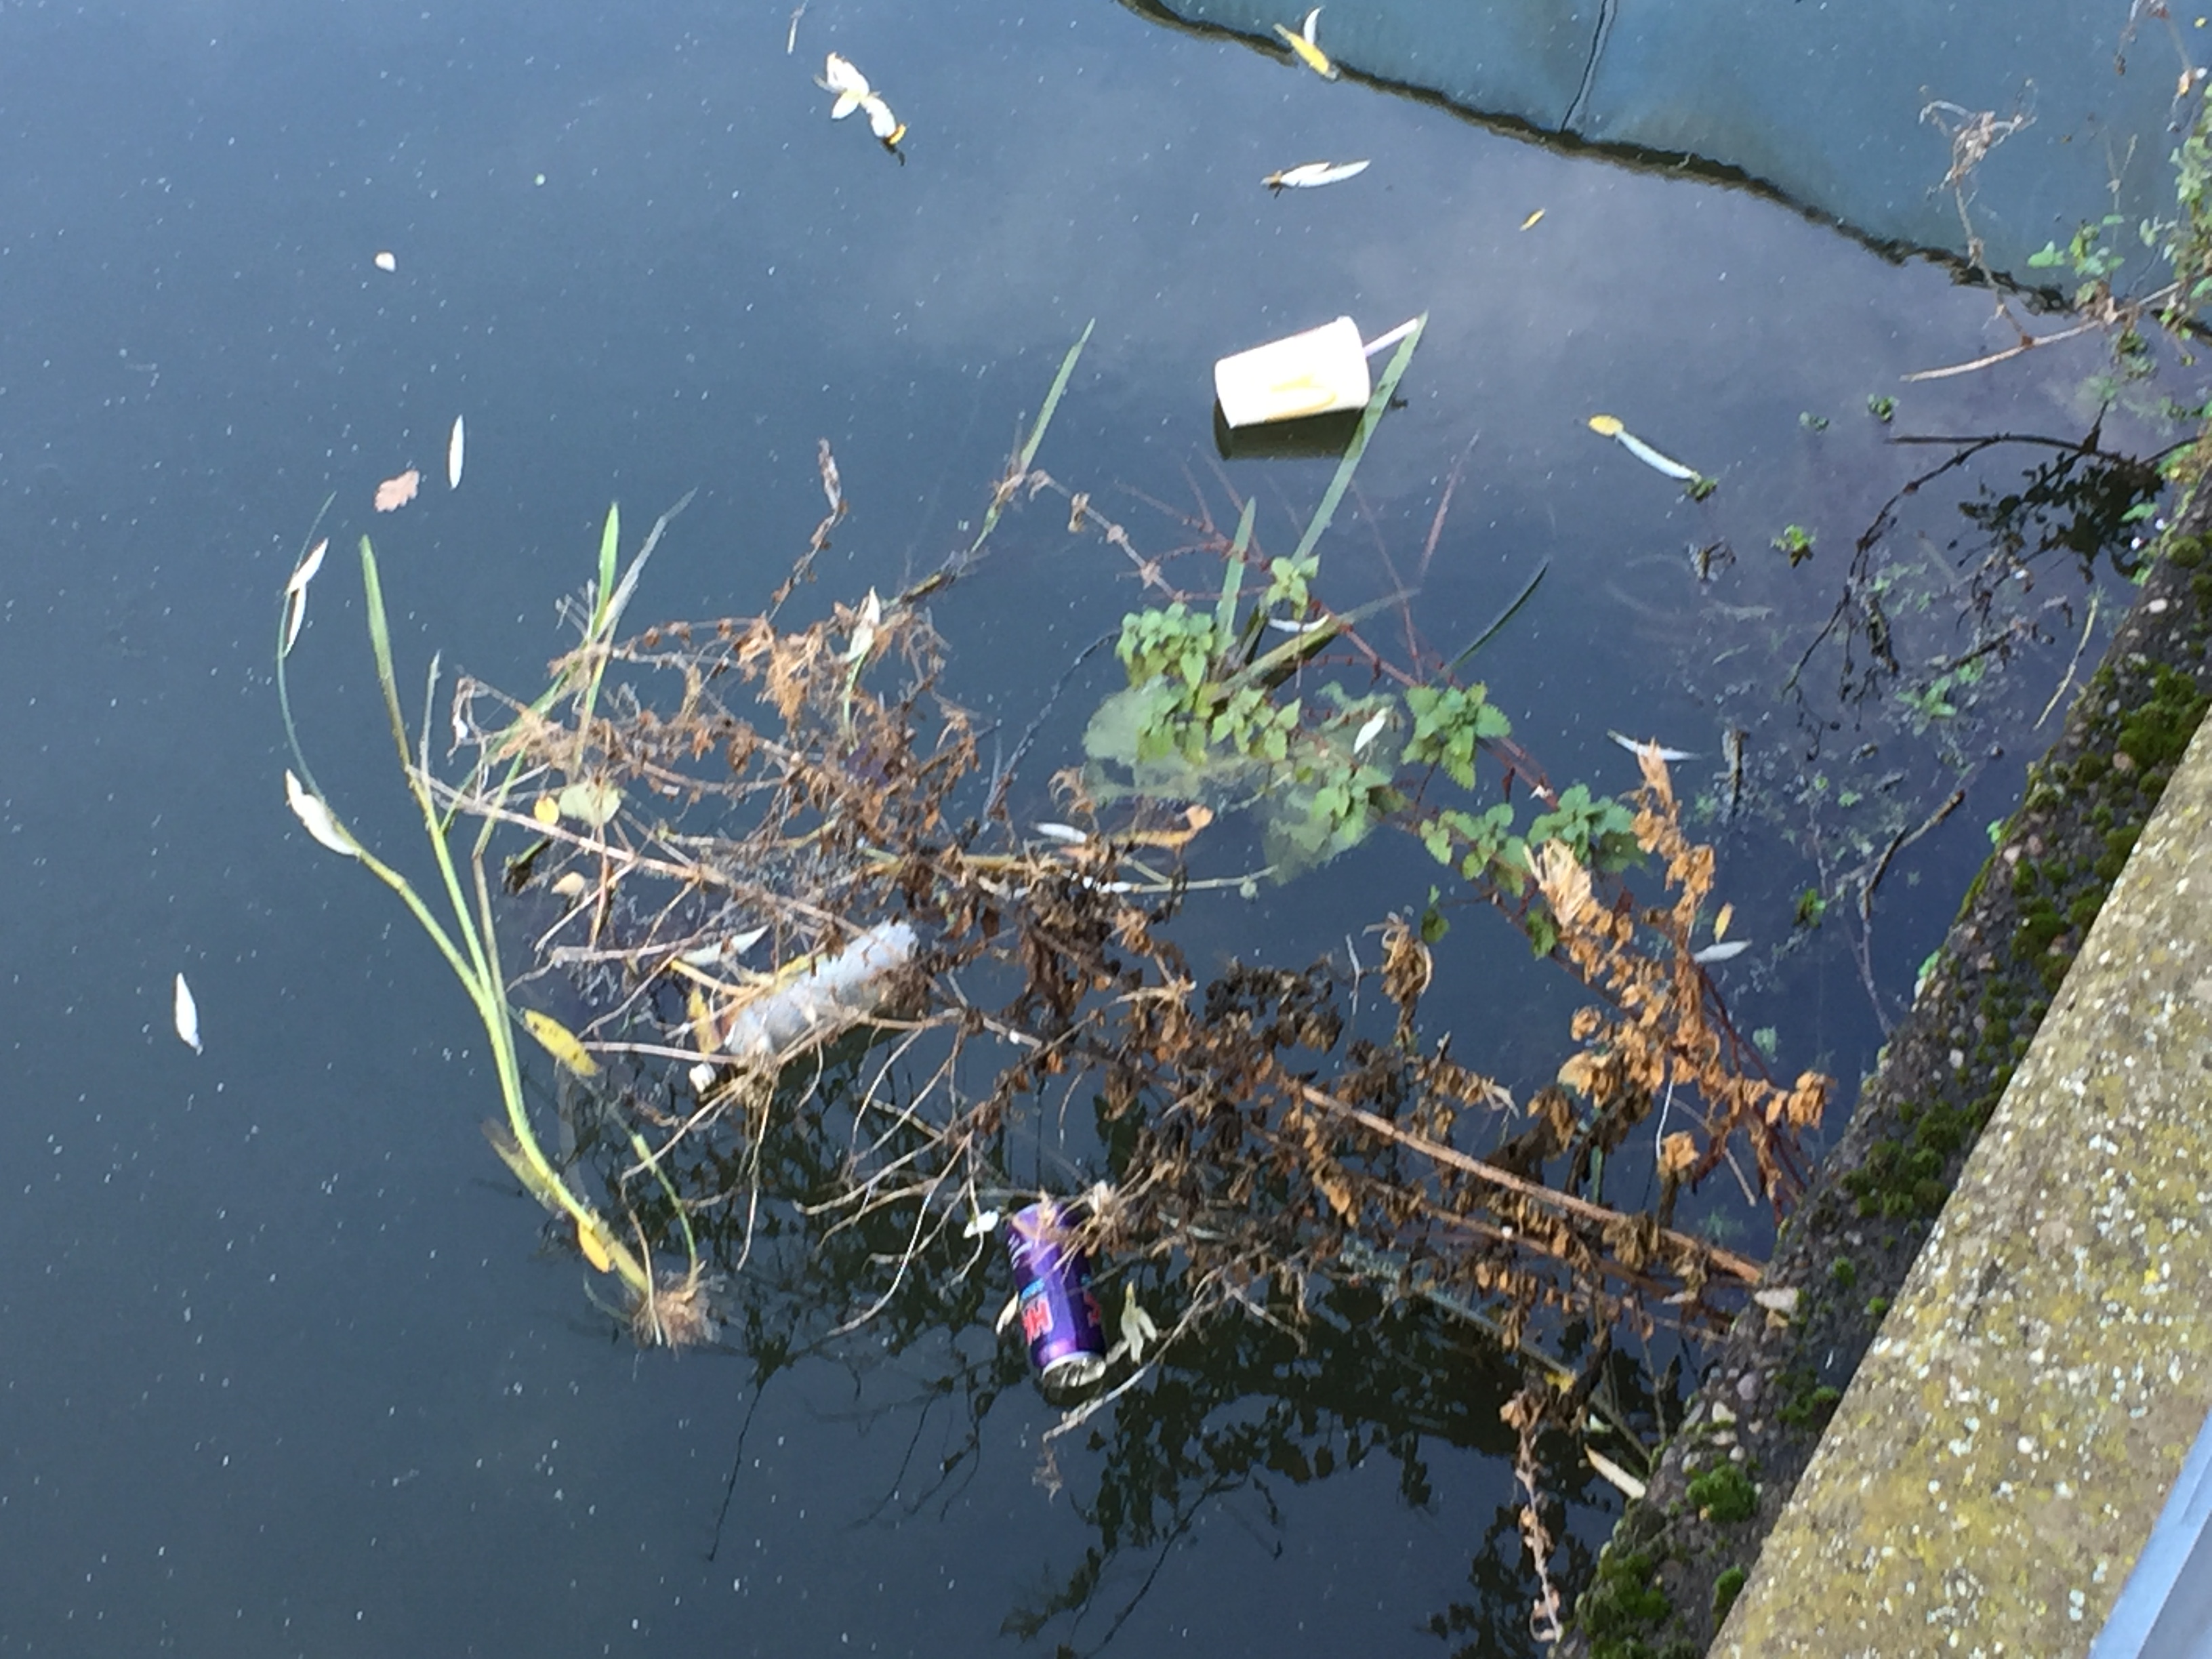 Weeds and rubbish in the Brayford Pool